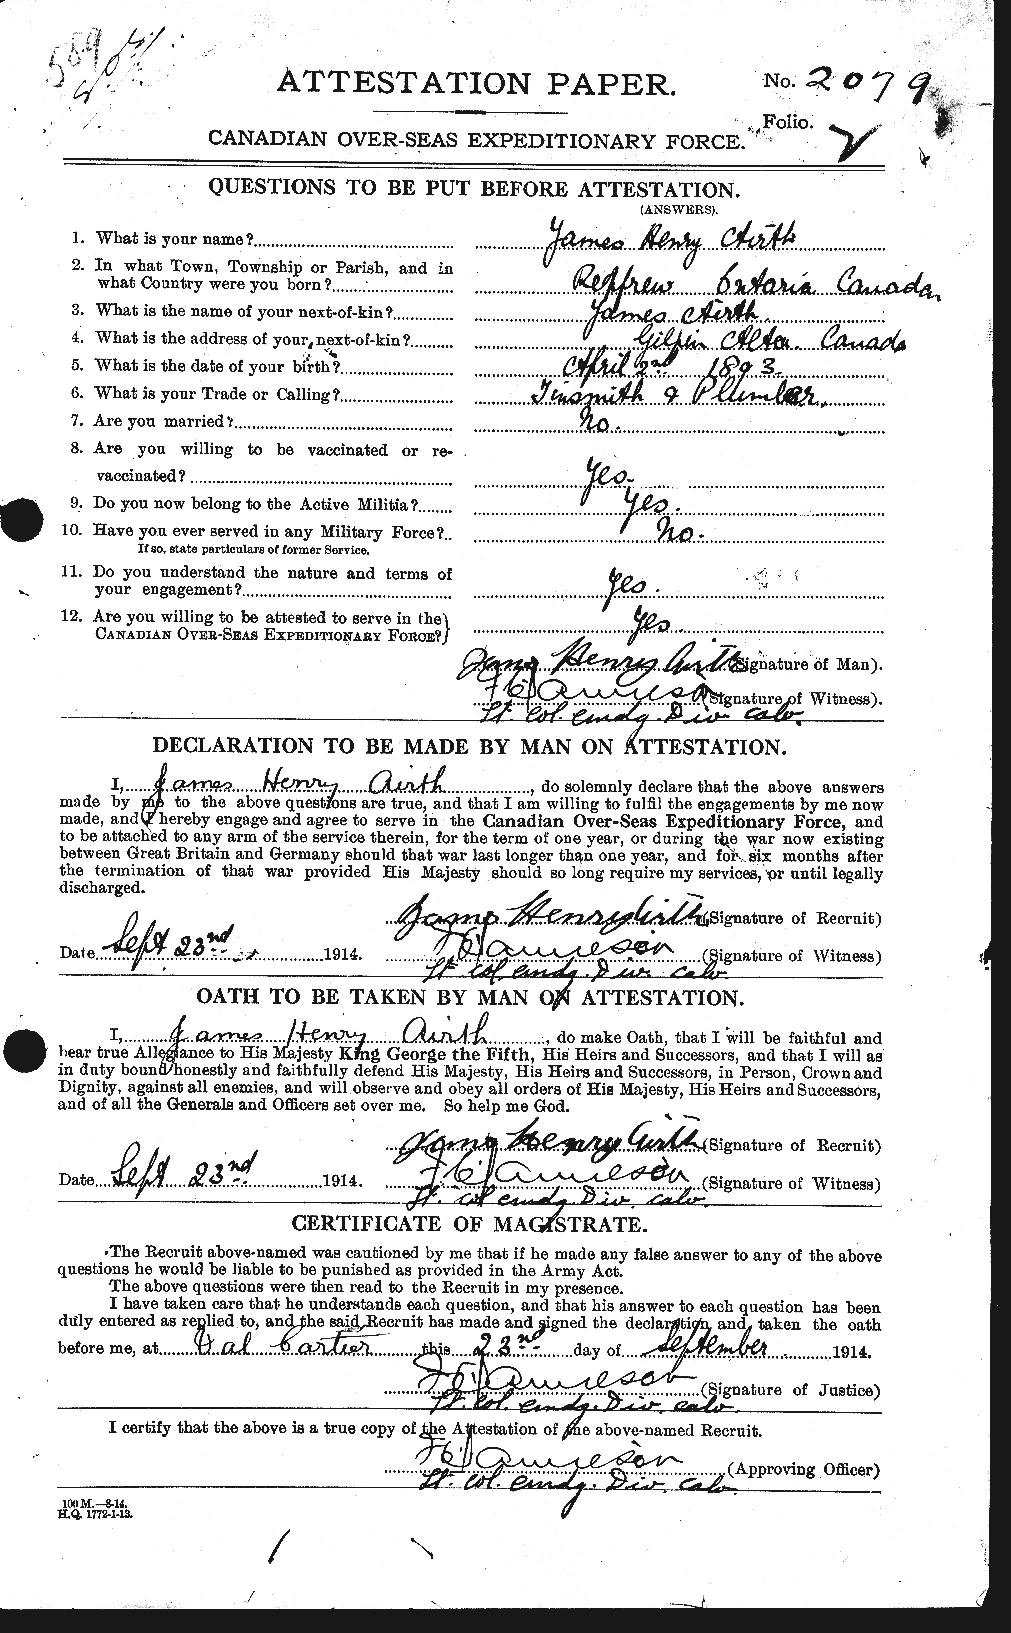 Attestation record: James Henry Airth